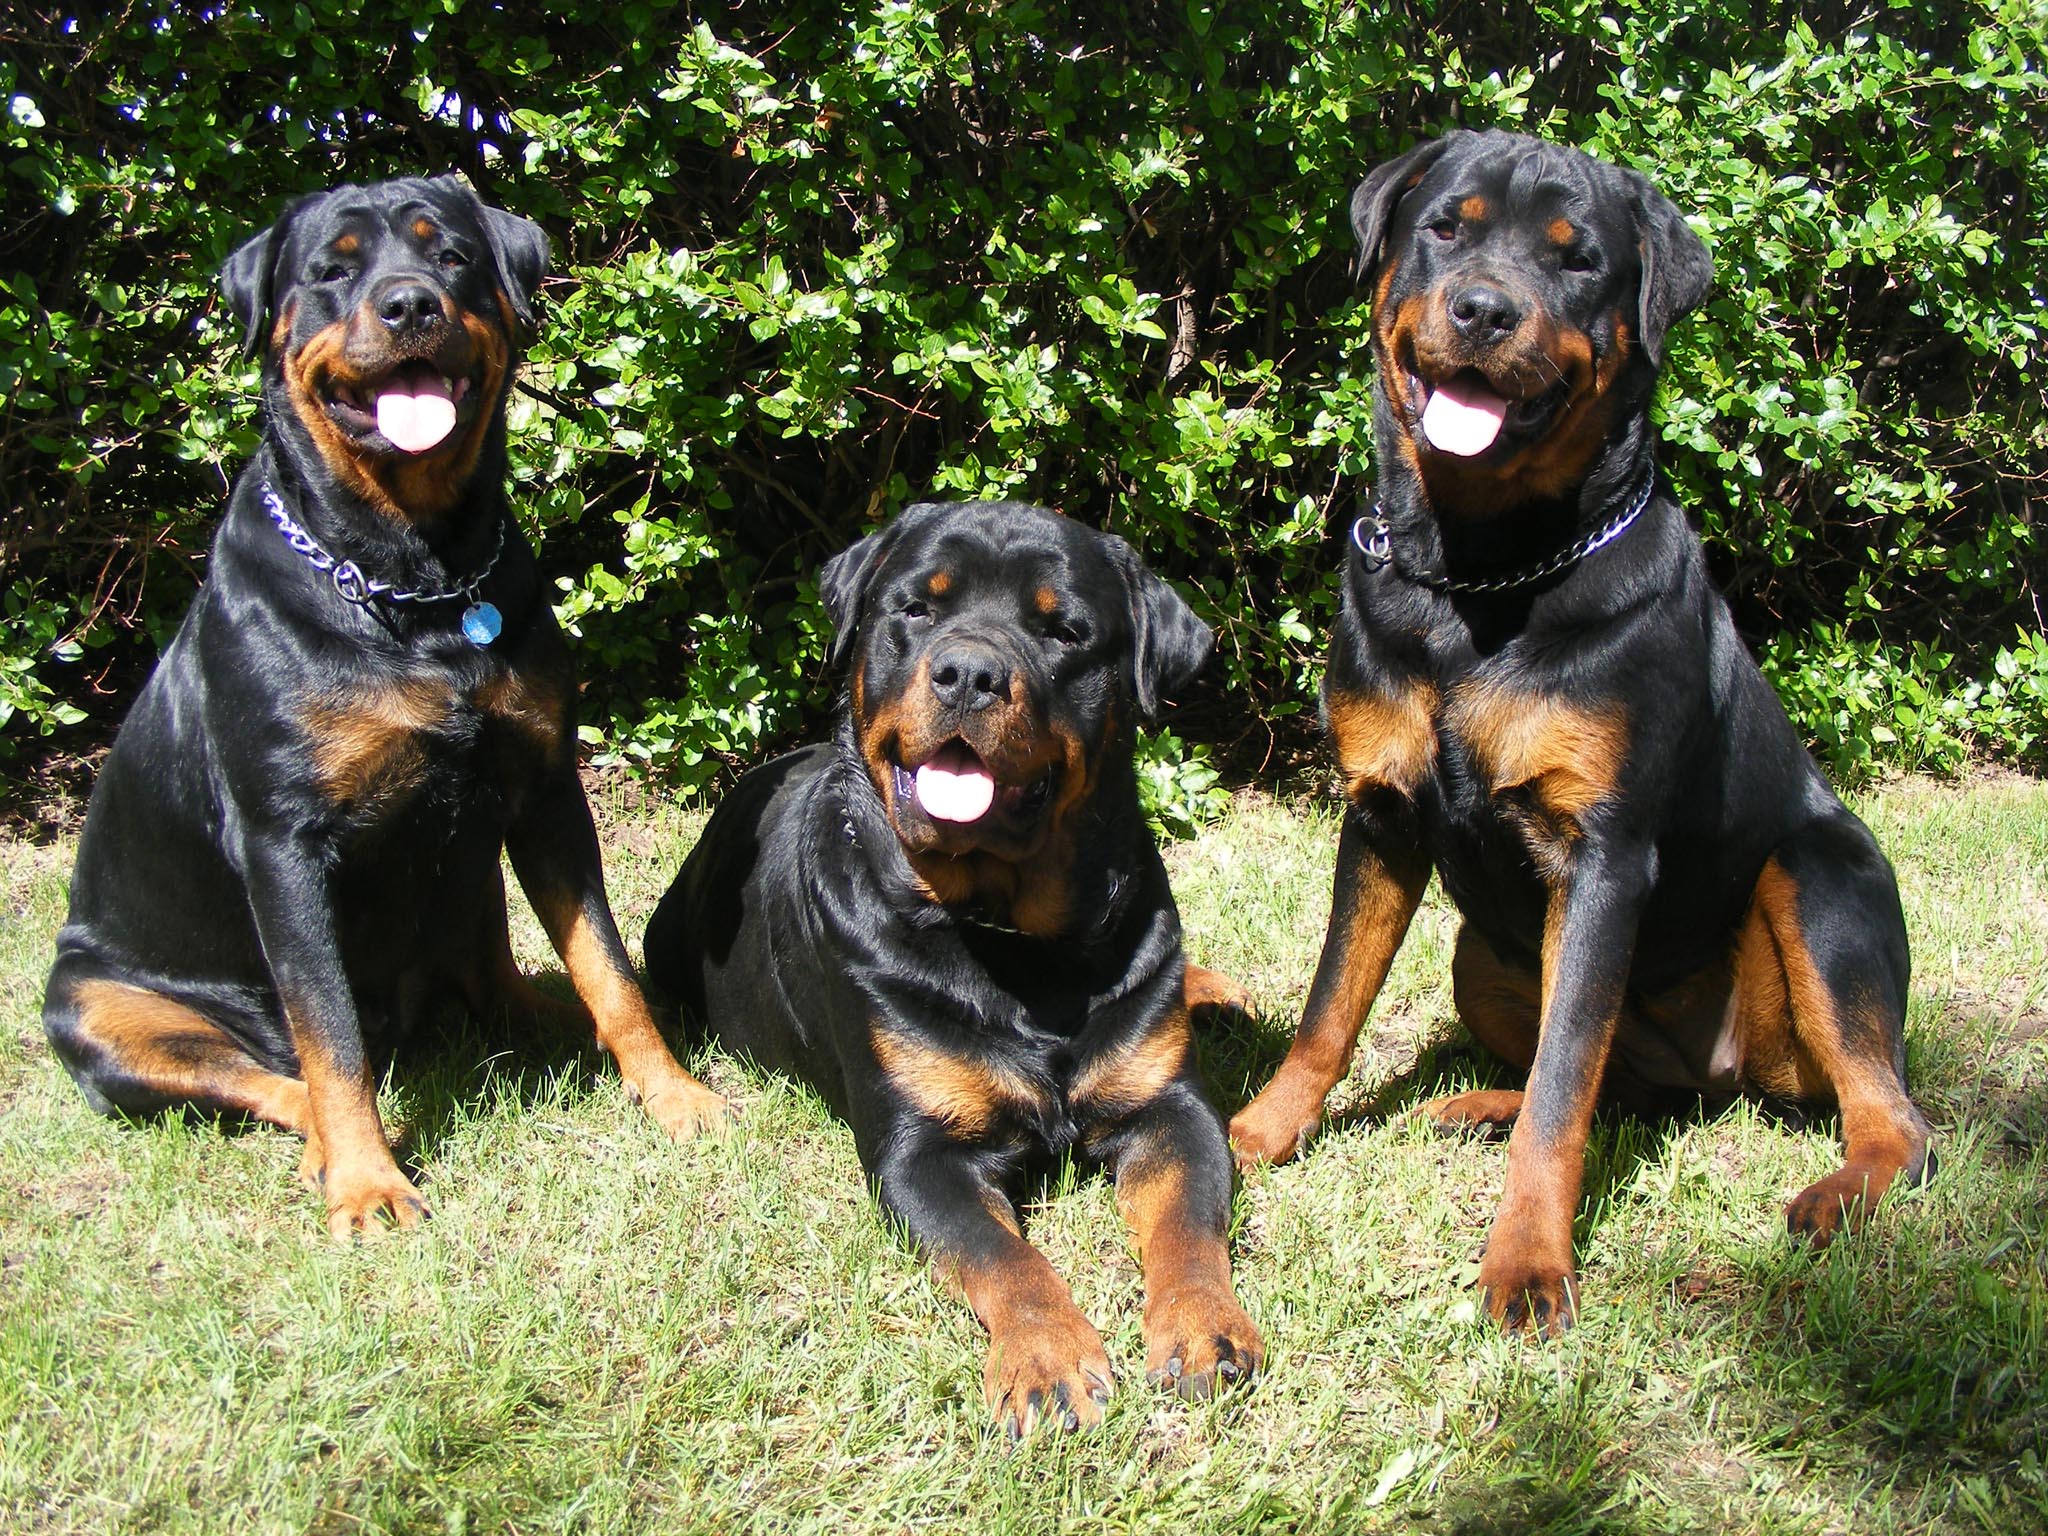 Rottweiler Dogs Hd 1080P 11 wallpapers4k.org